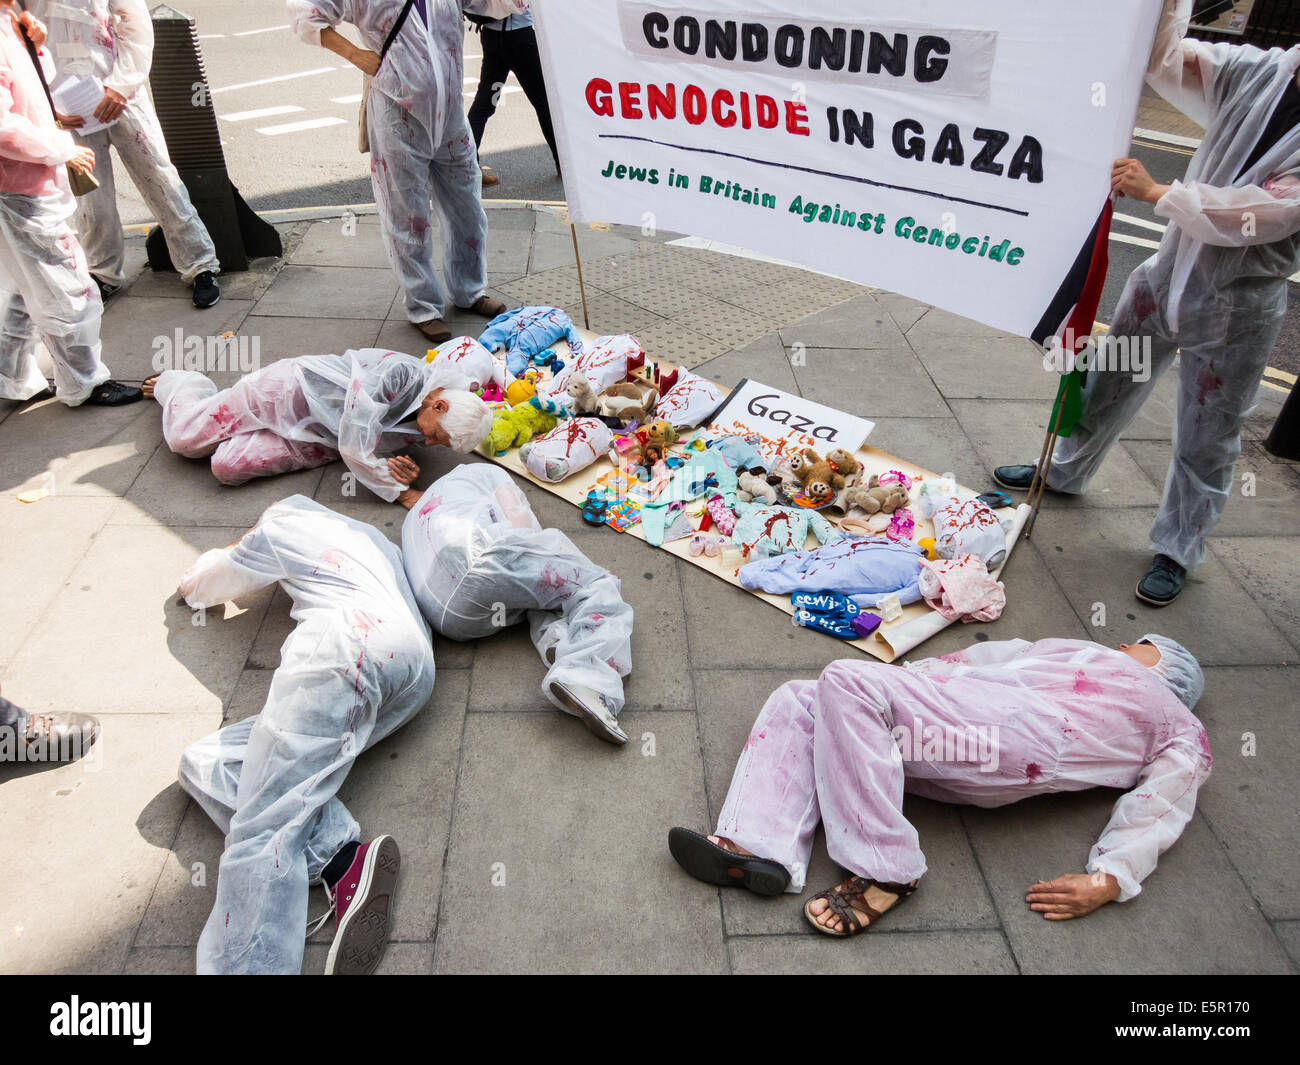 London: 'Jews in Britain Against Genocide' protest outside Board of Deputies Stock Photo